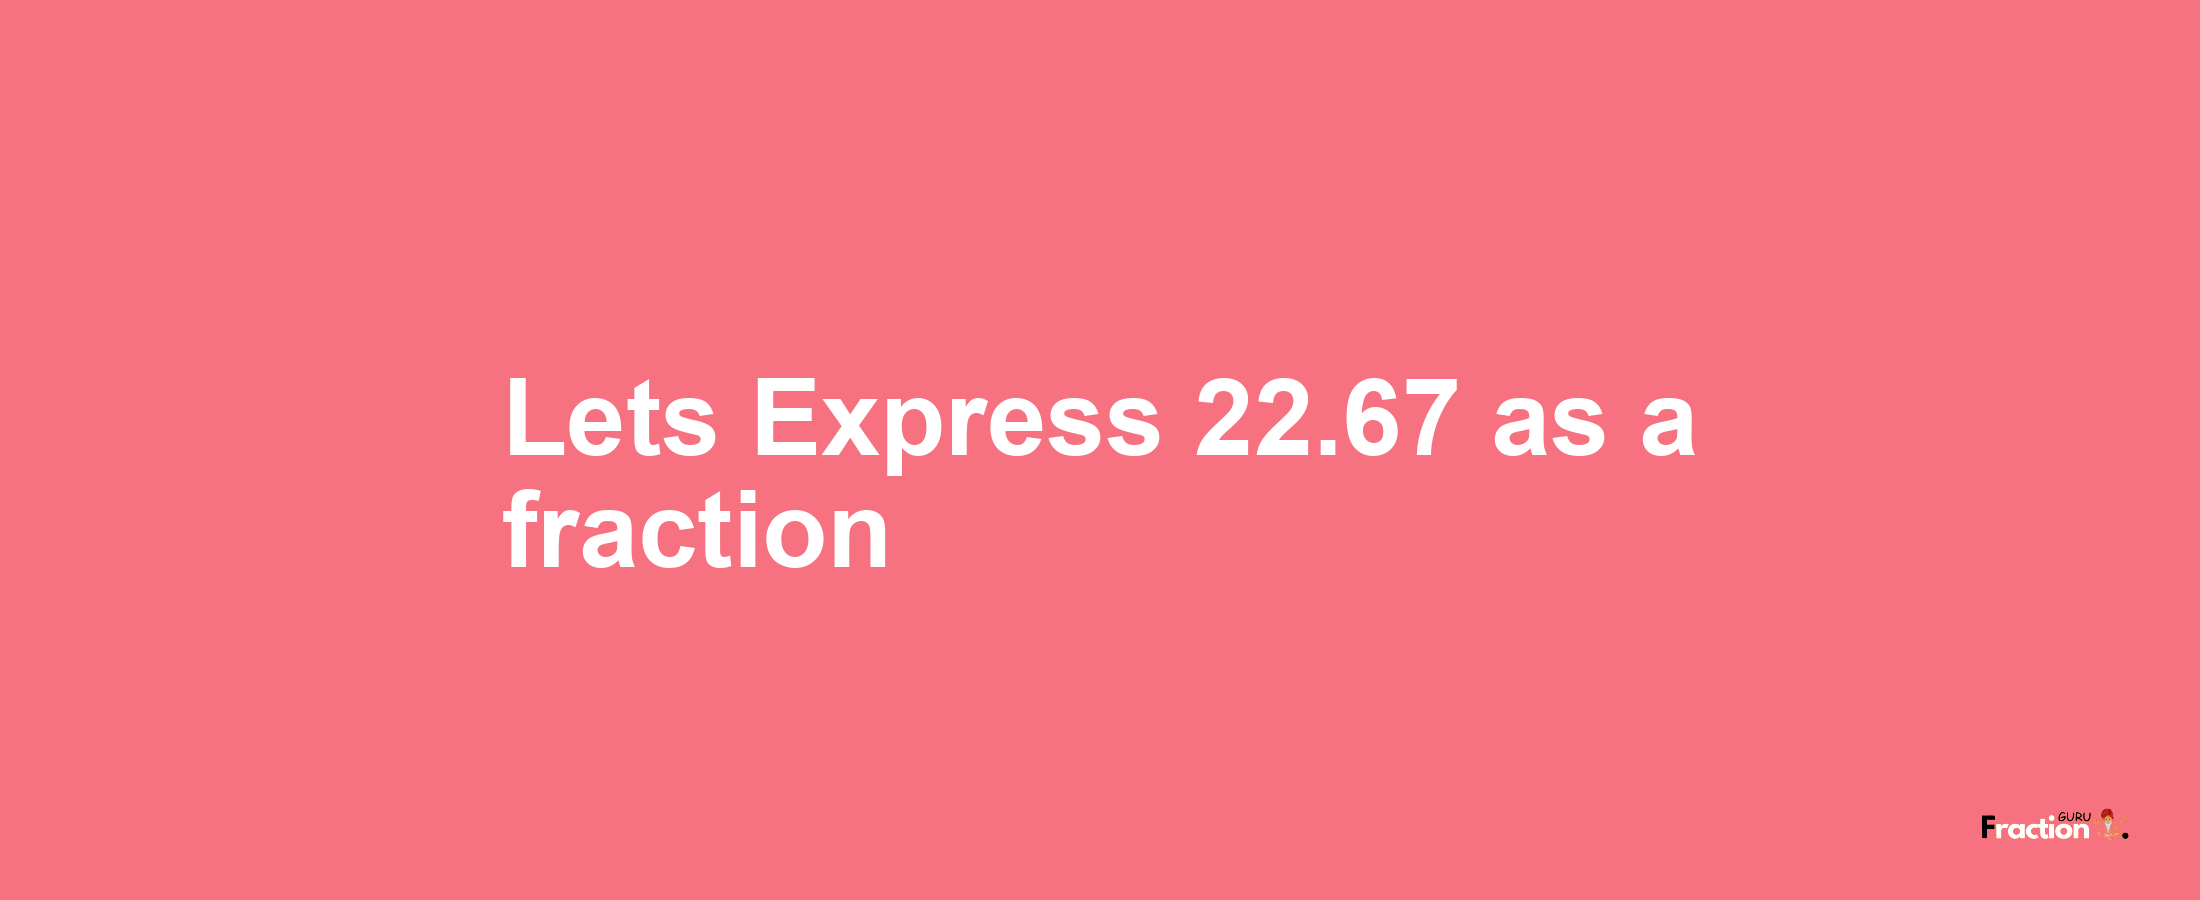 Lets Express 22.67 as afraction